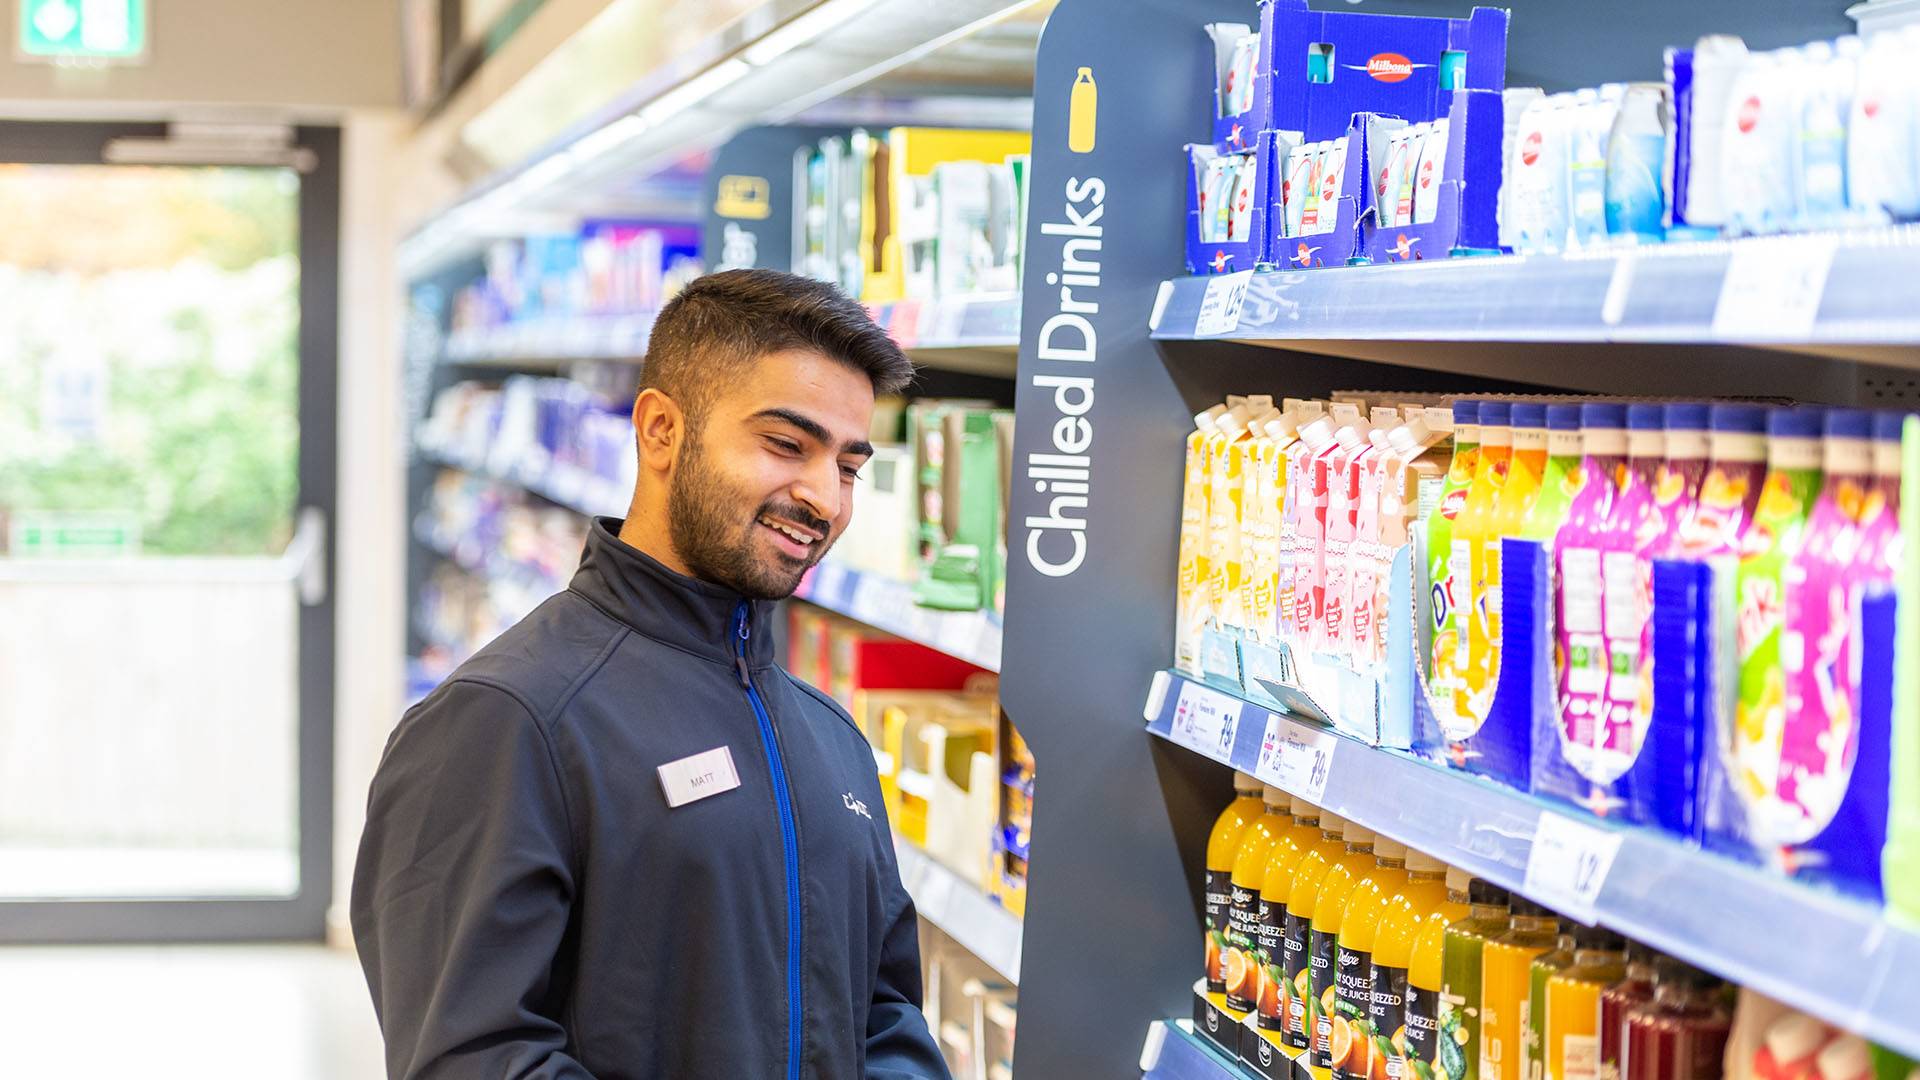 Customer Assistant at Lidl, Brighton